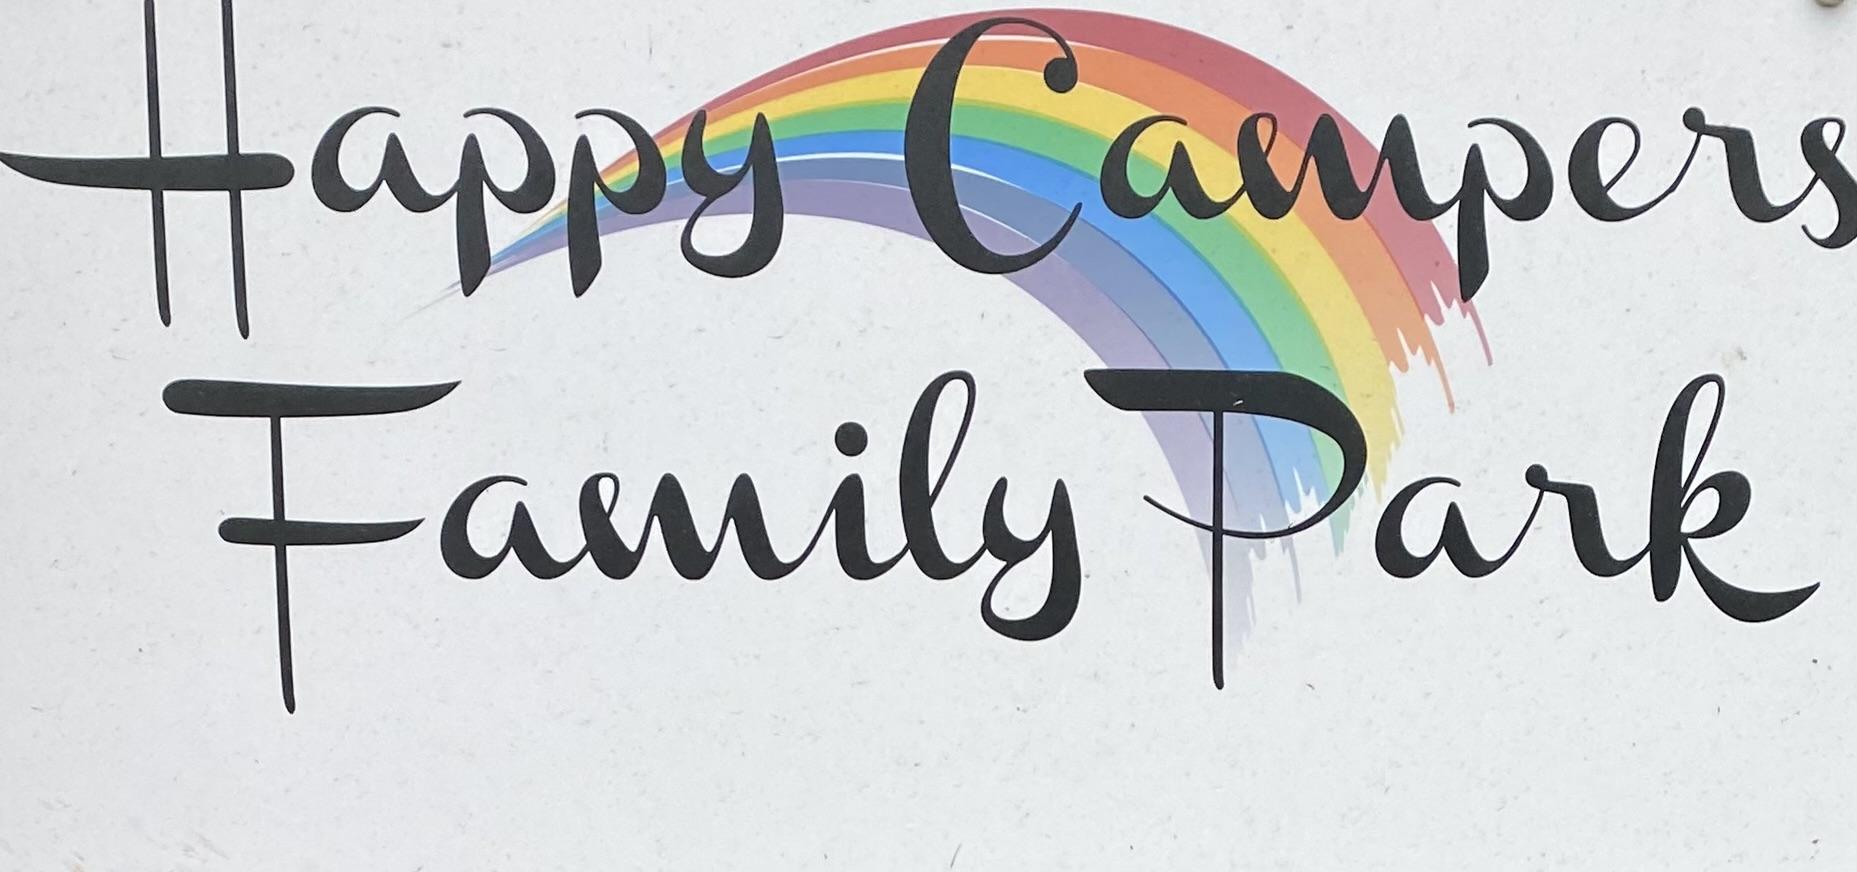 Happy Campers Family Park